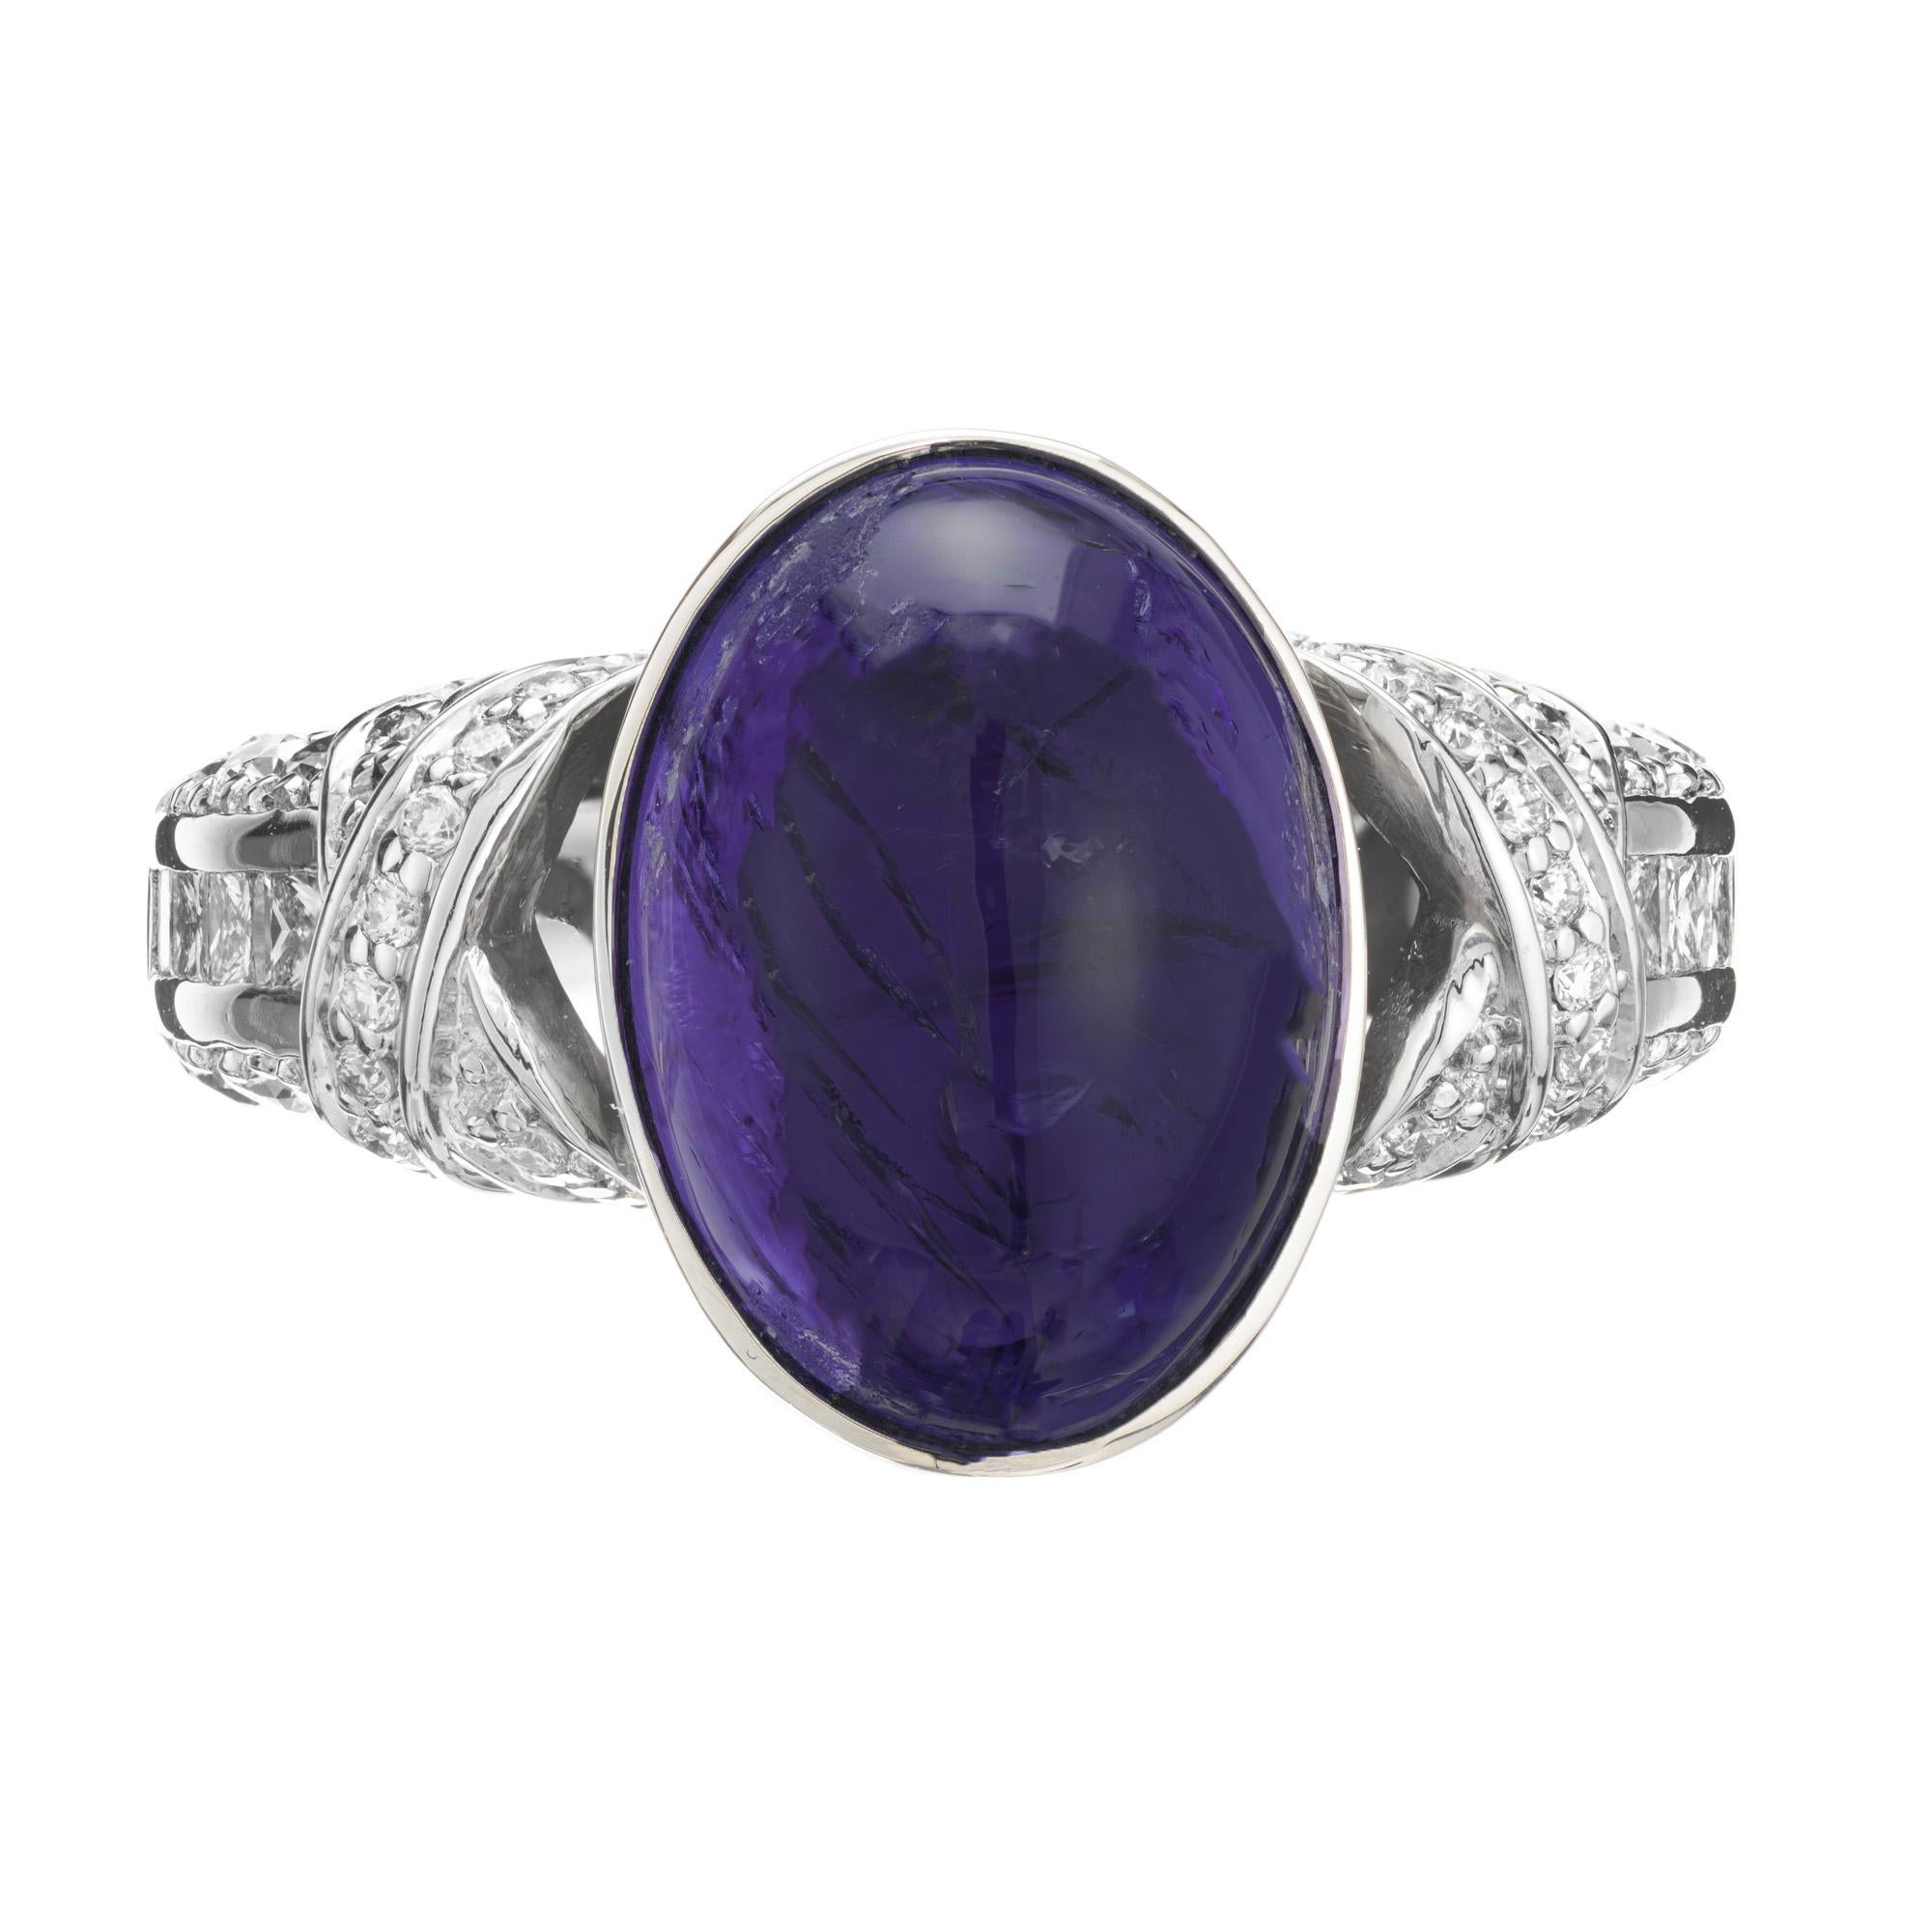 1970's Tanzanite and diamond ring. 9.88 Carat oval cabochon bezel set Tanzanite center stone. Mounted in a 14k white gold X style setting with 8 princess cut accent diamonds along the shank and 46 round cut diamonds also along the shank and X design